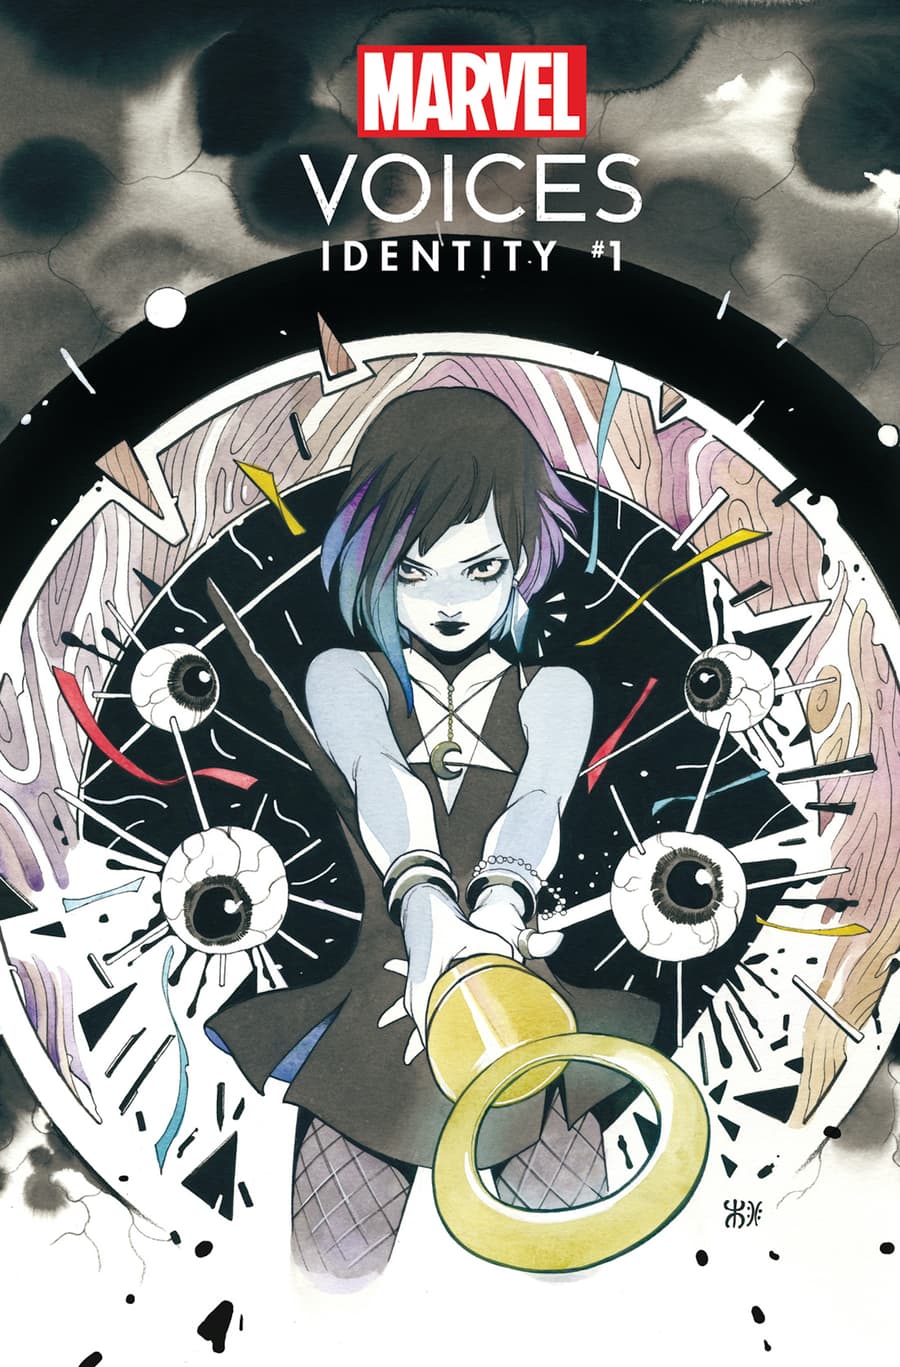 MARVEL’S VOICES: IDENTITY #1 Variant Cover by PEACH MOMOKO